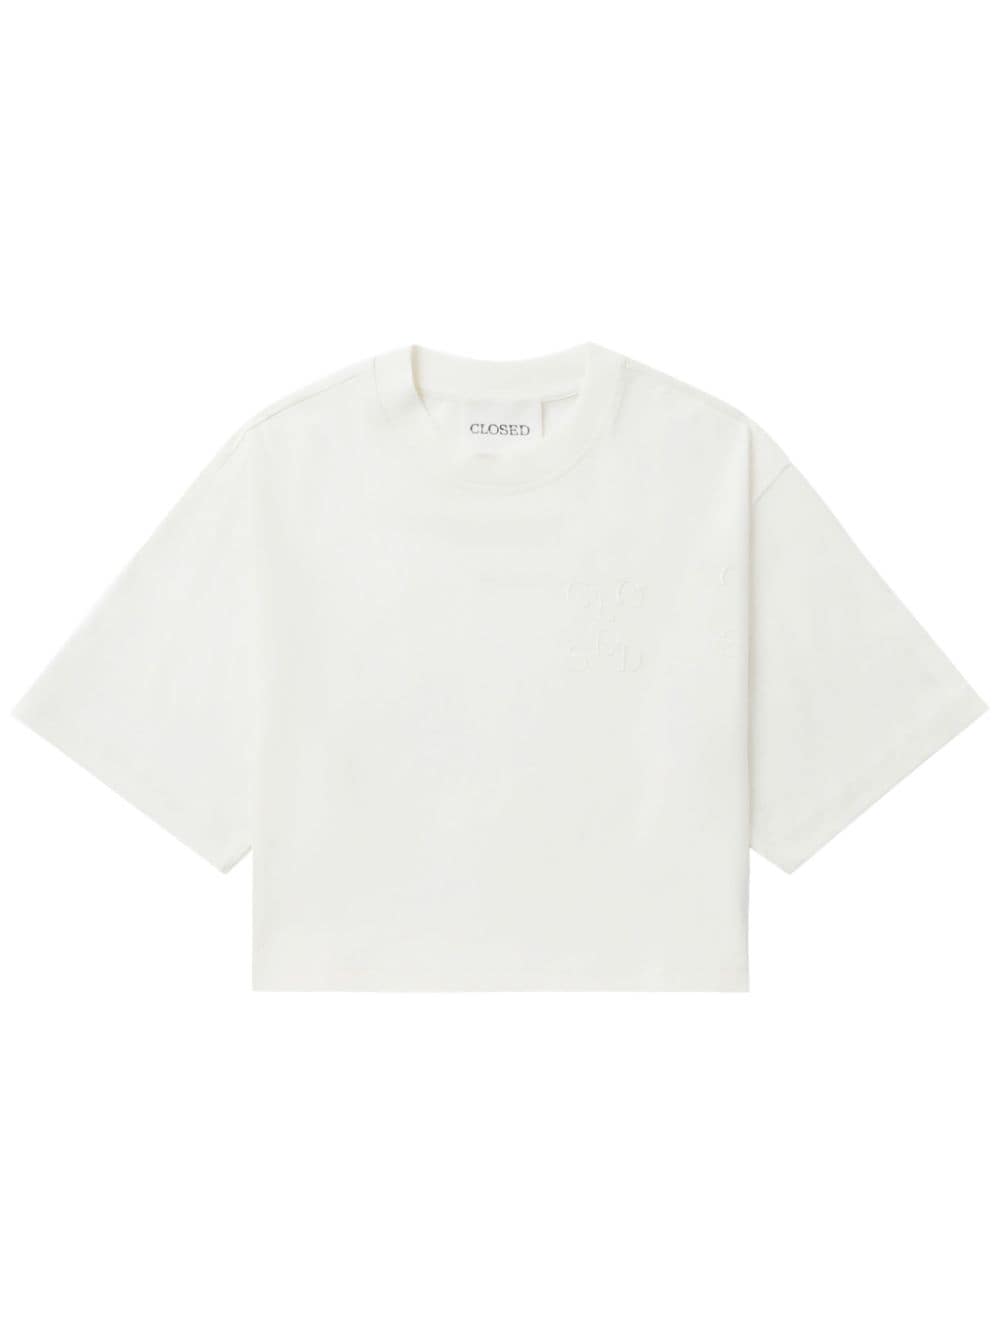 Closed cropped t-shirt - White von Closed